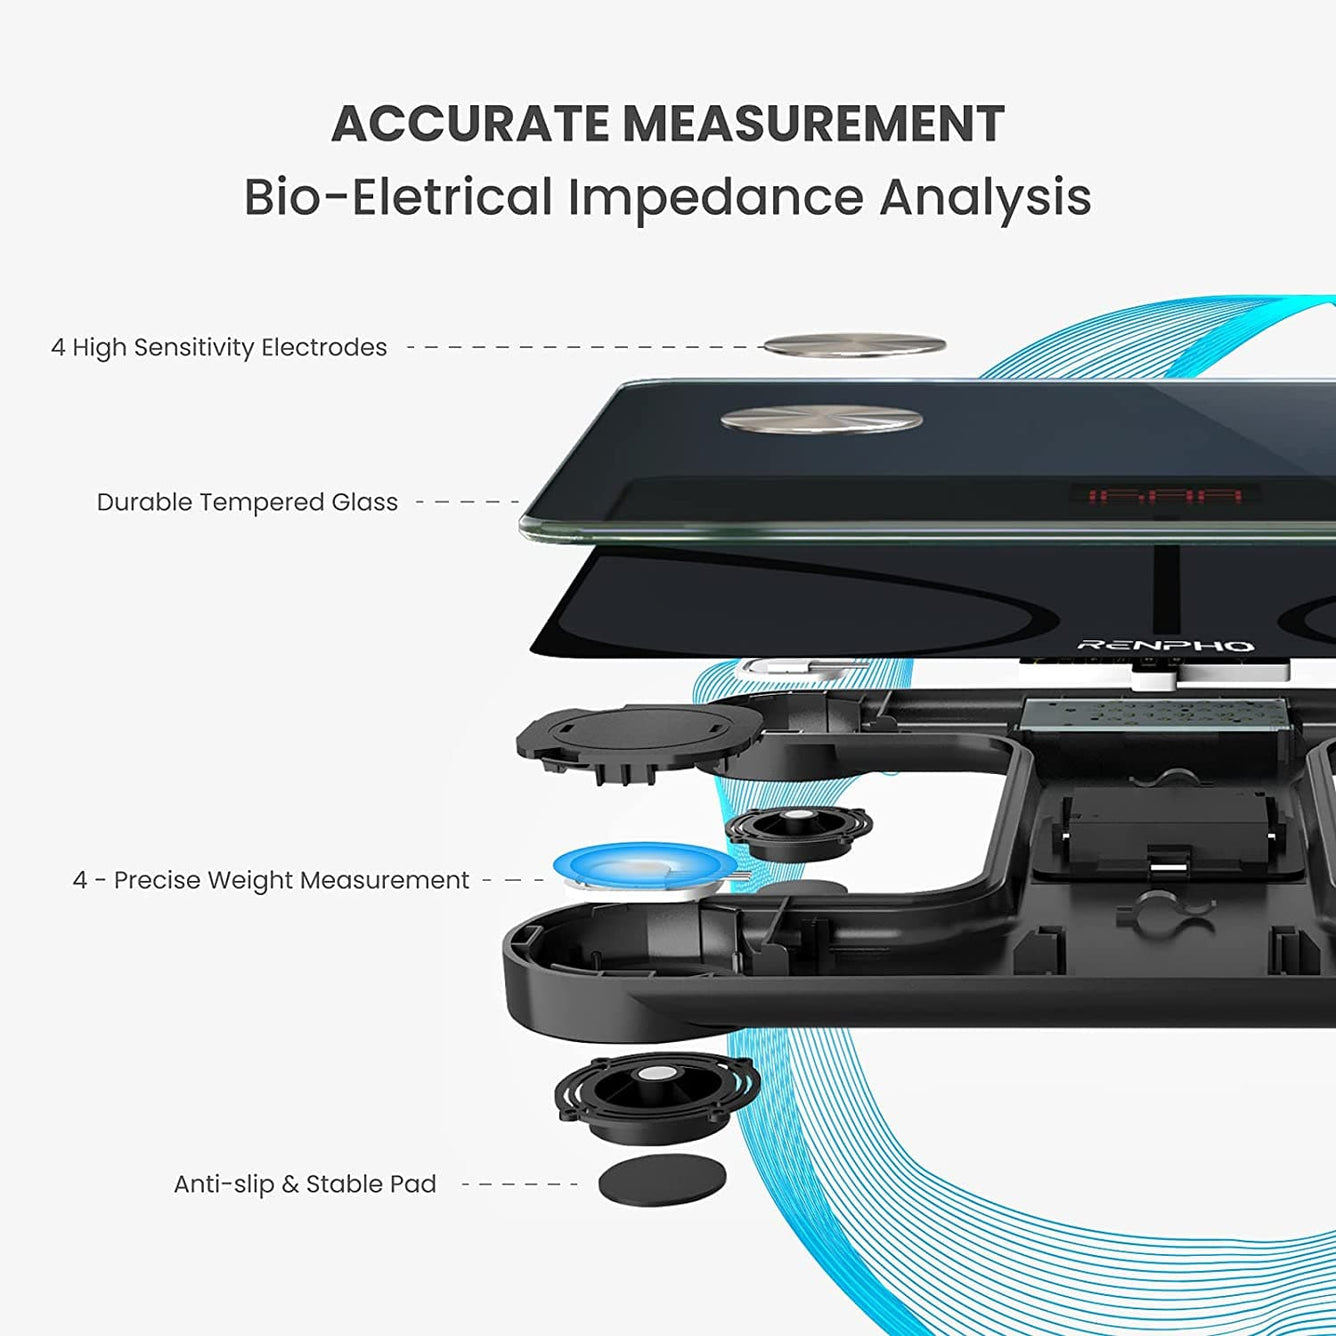 A Renpho Elis 1 Smart Body Scale with accurate fitness measurements and bio-electric impedance analysis for wellness tracking.